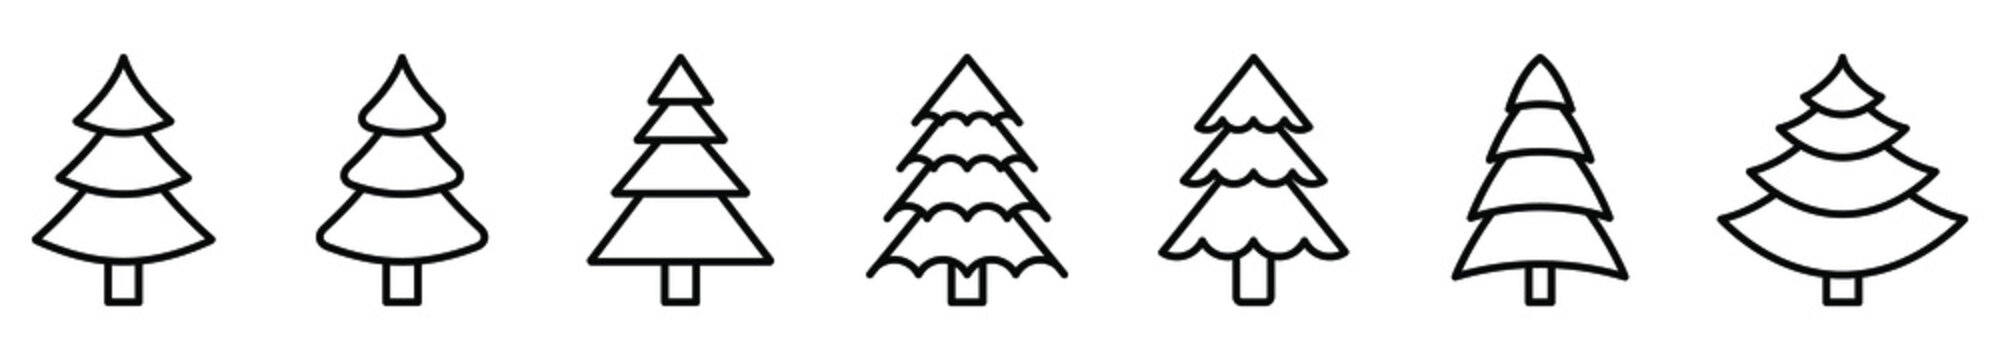 Christmas tree icon. Set of linear christmas tree icons on white background. Vector illustration